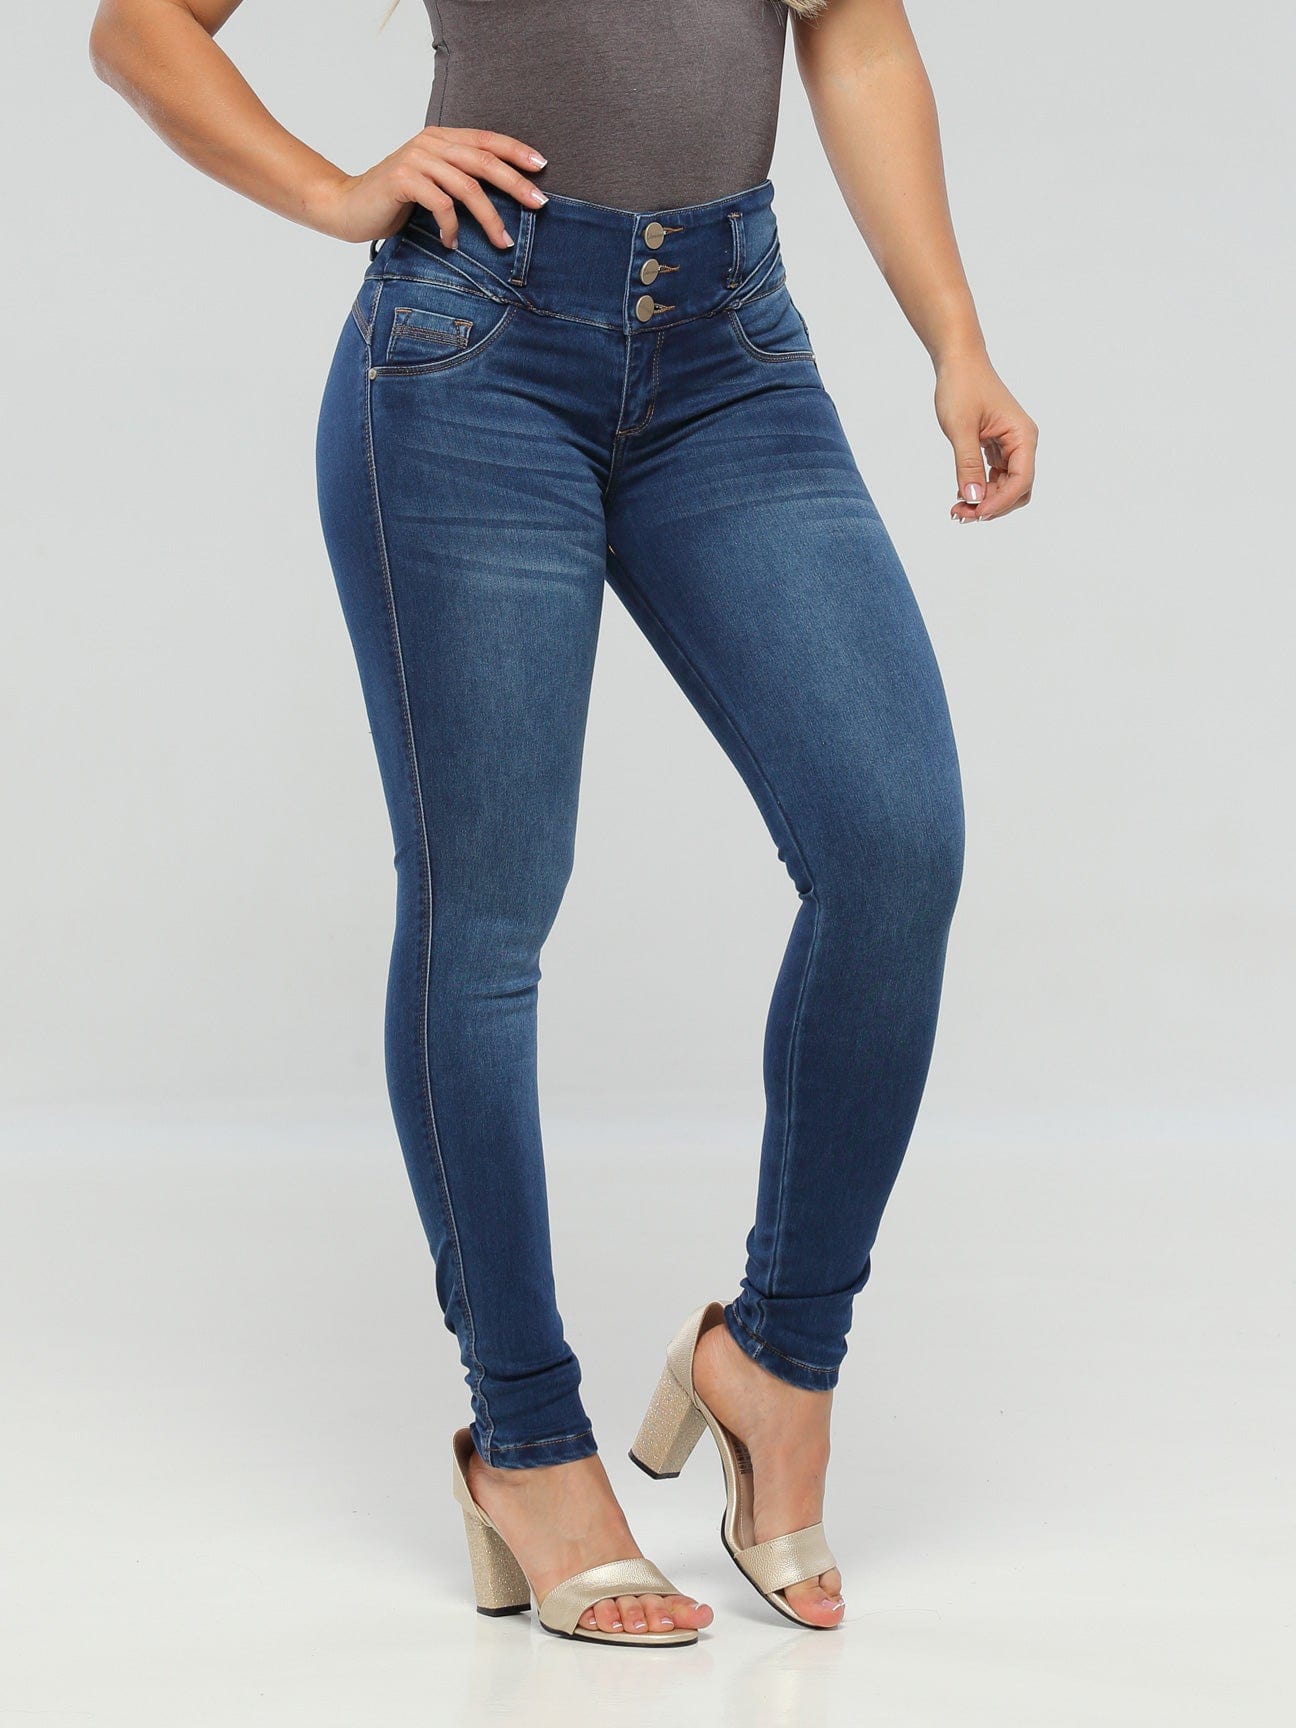 Colombian Jeans pantalones colombianos - Findit Store